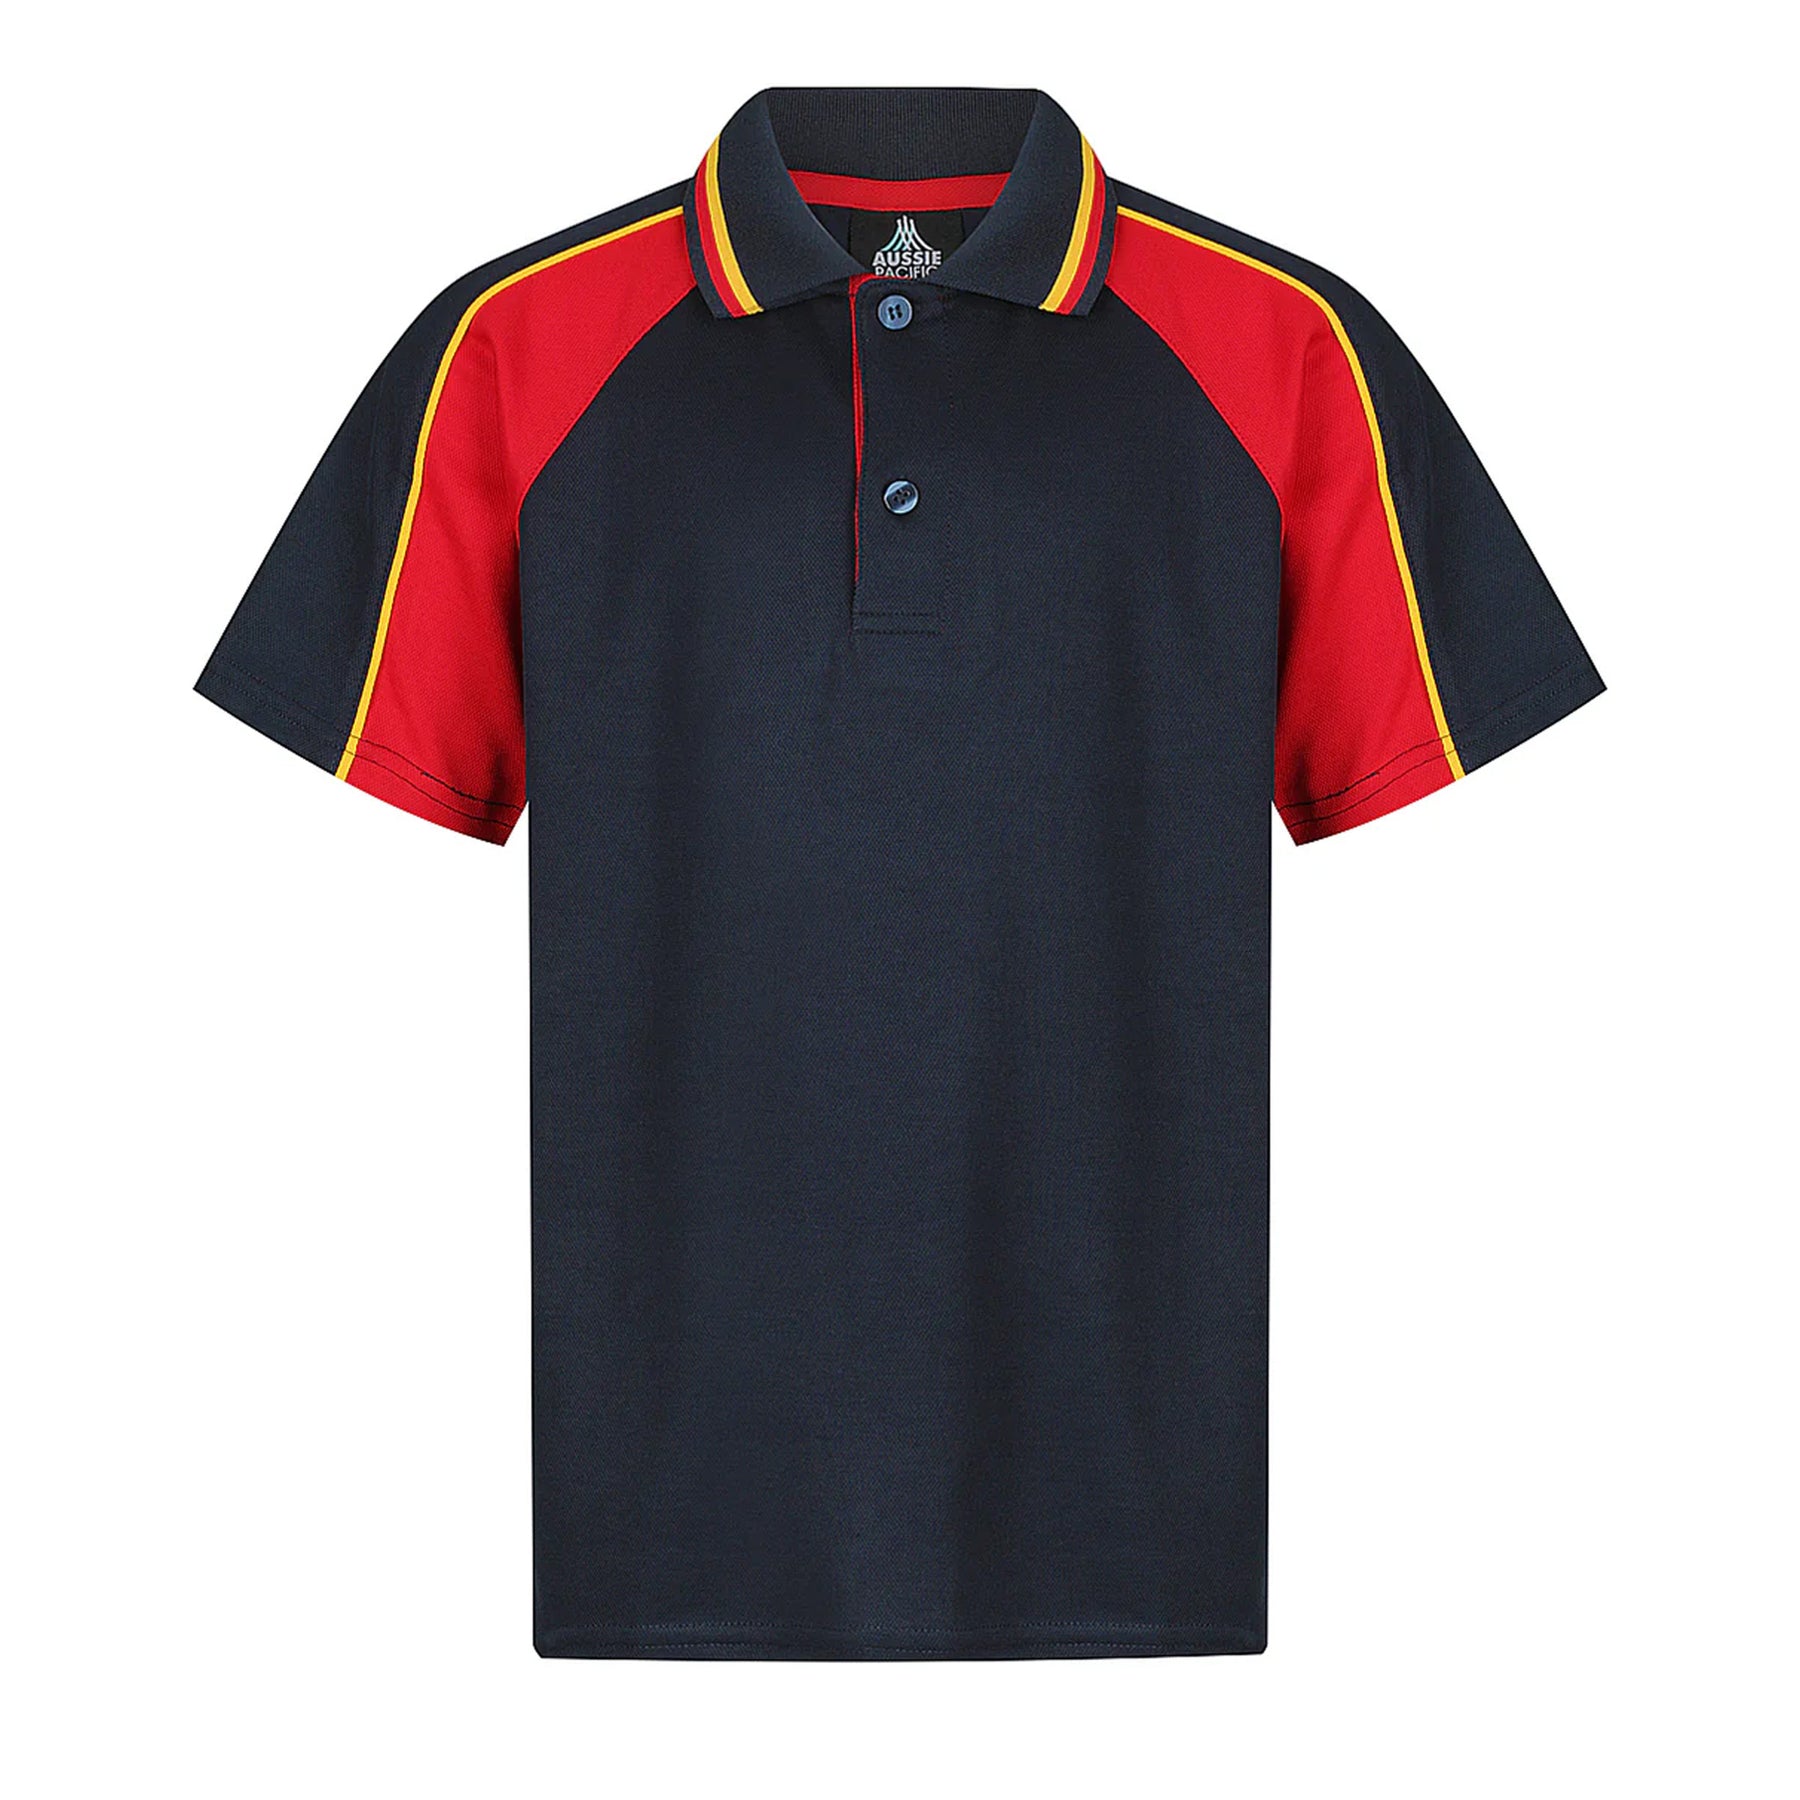 aussie pacific panorama kids polos in navy red gold